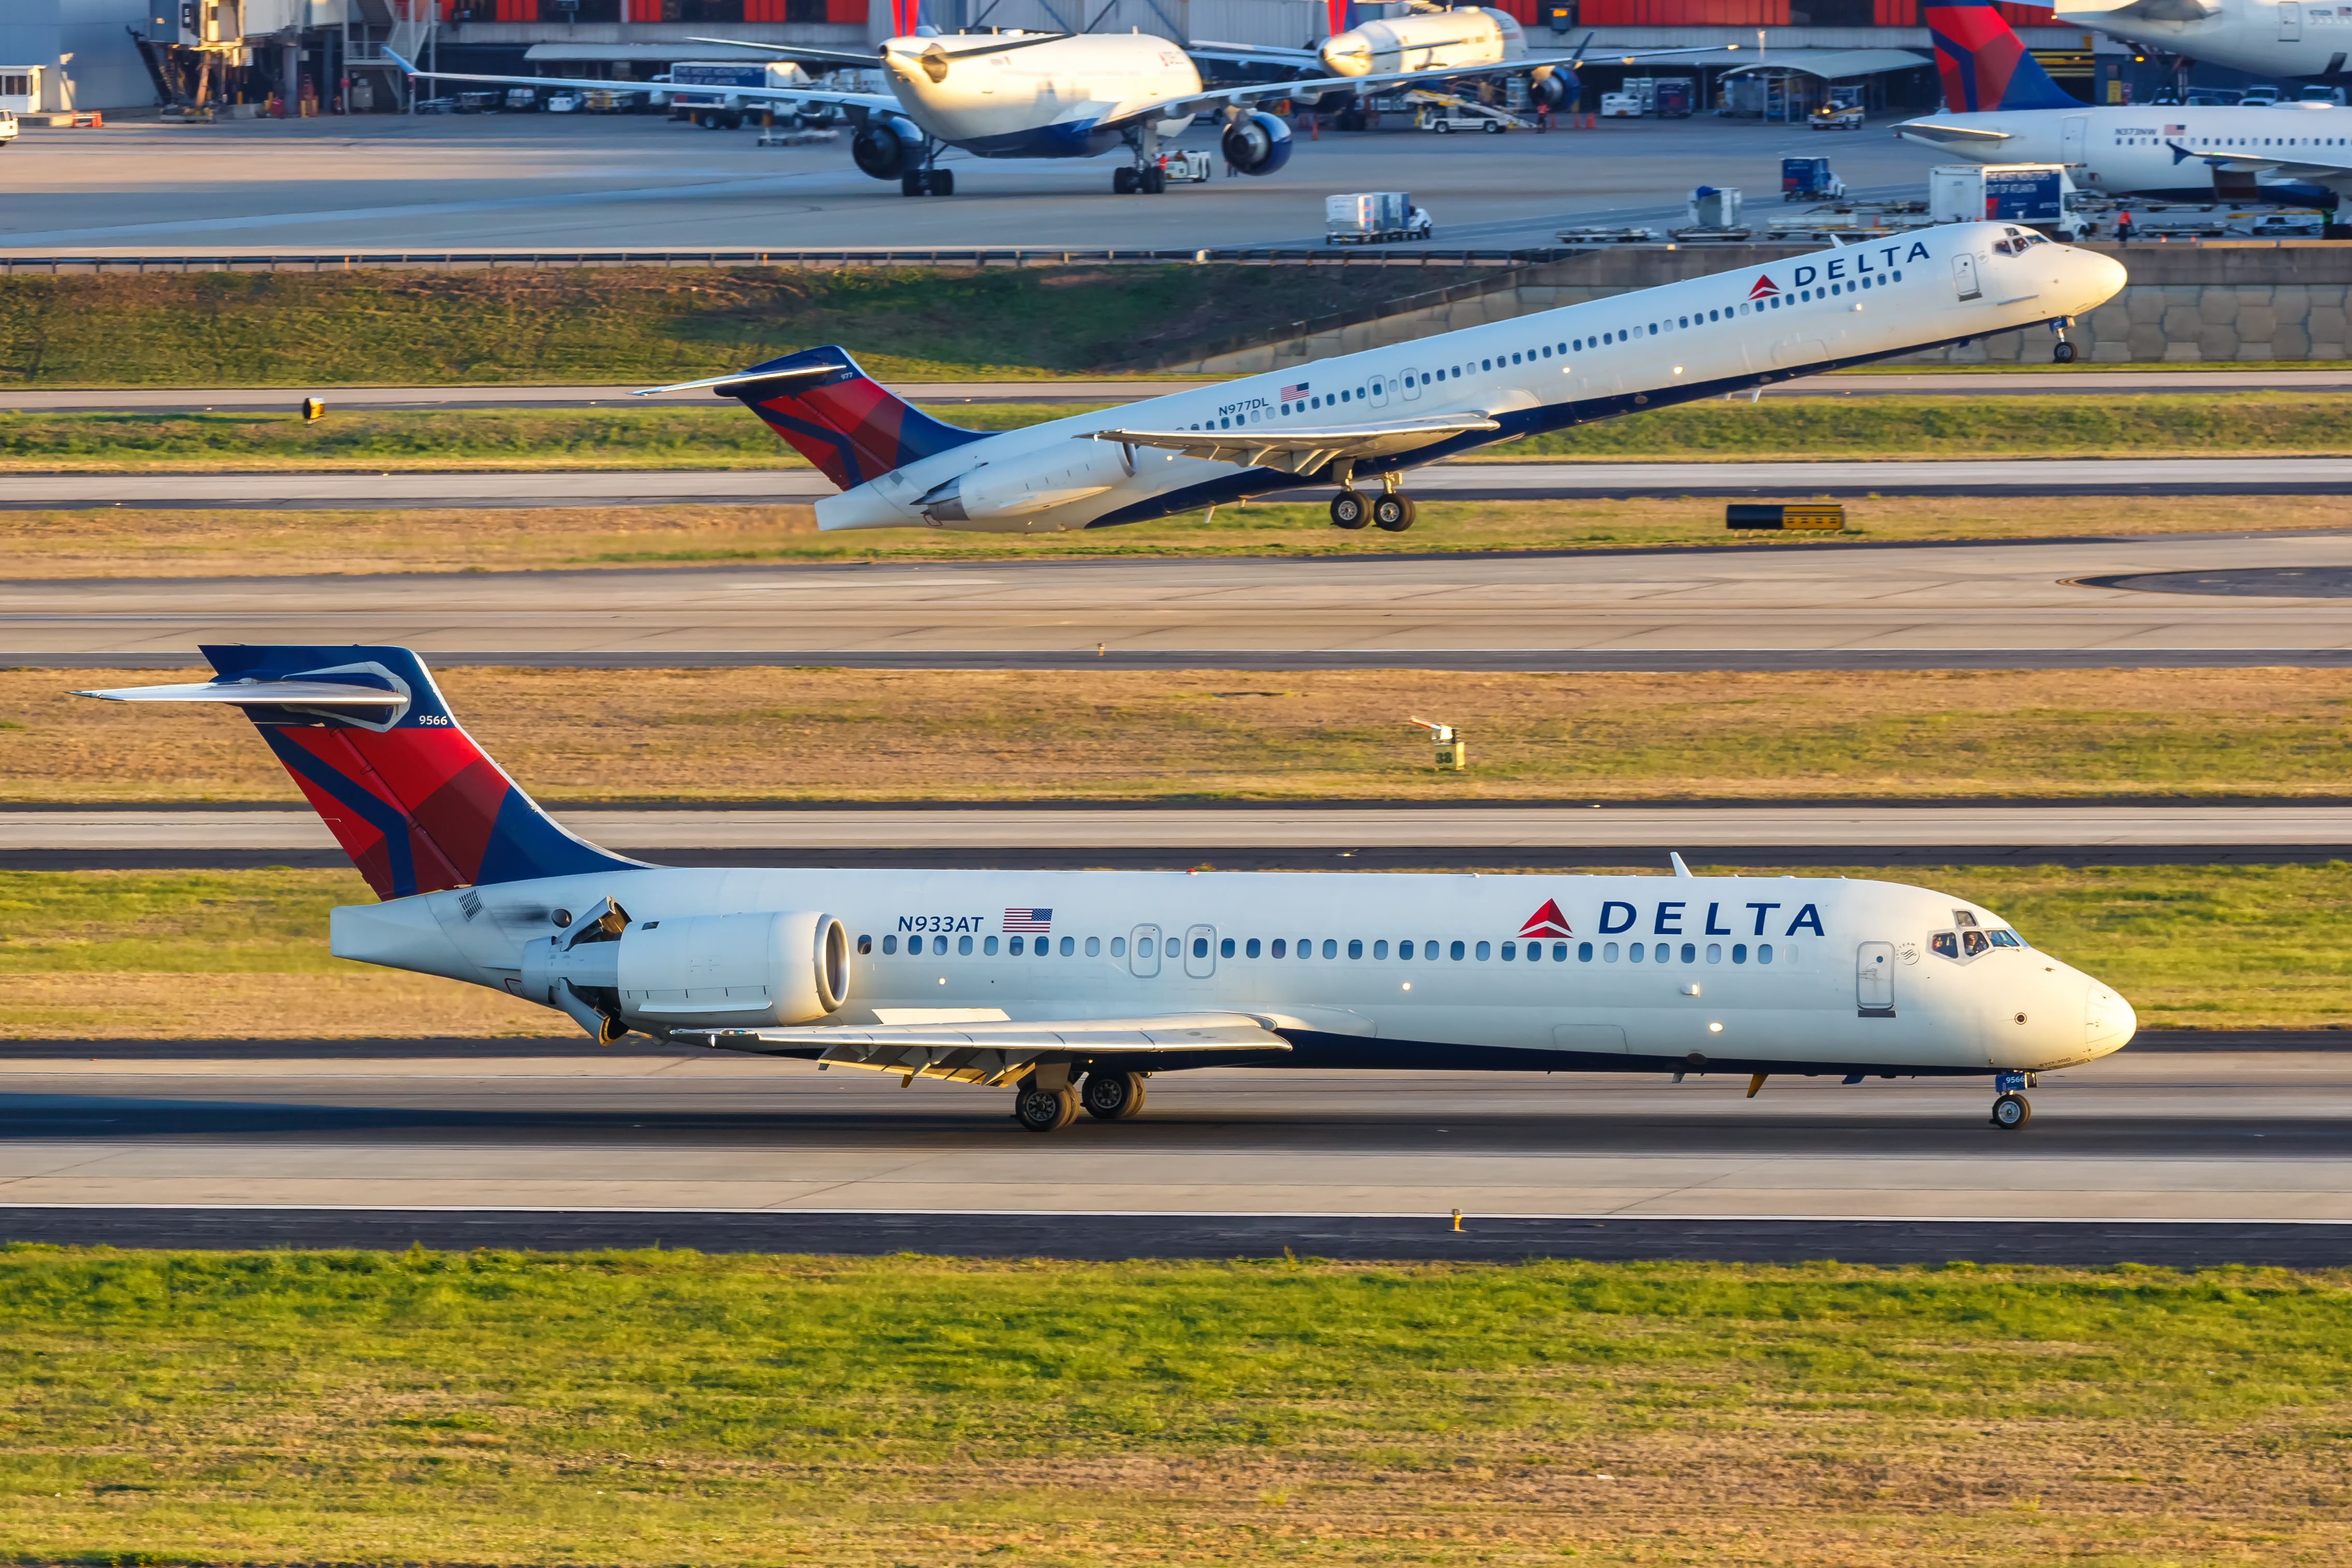 Two Delta Air Lines Boeing 717 aircraft, one taking off and one taxiing.